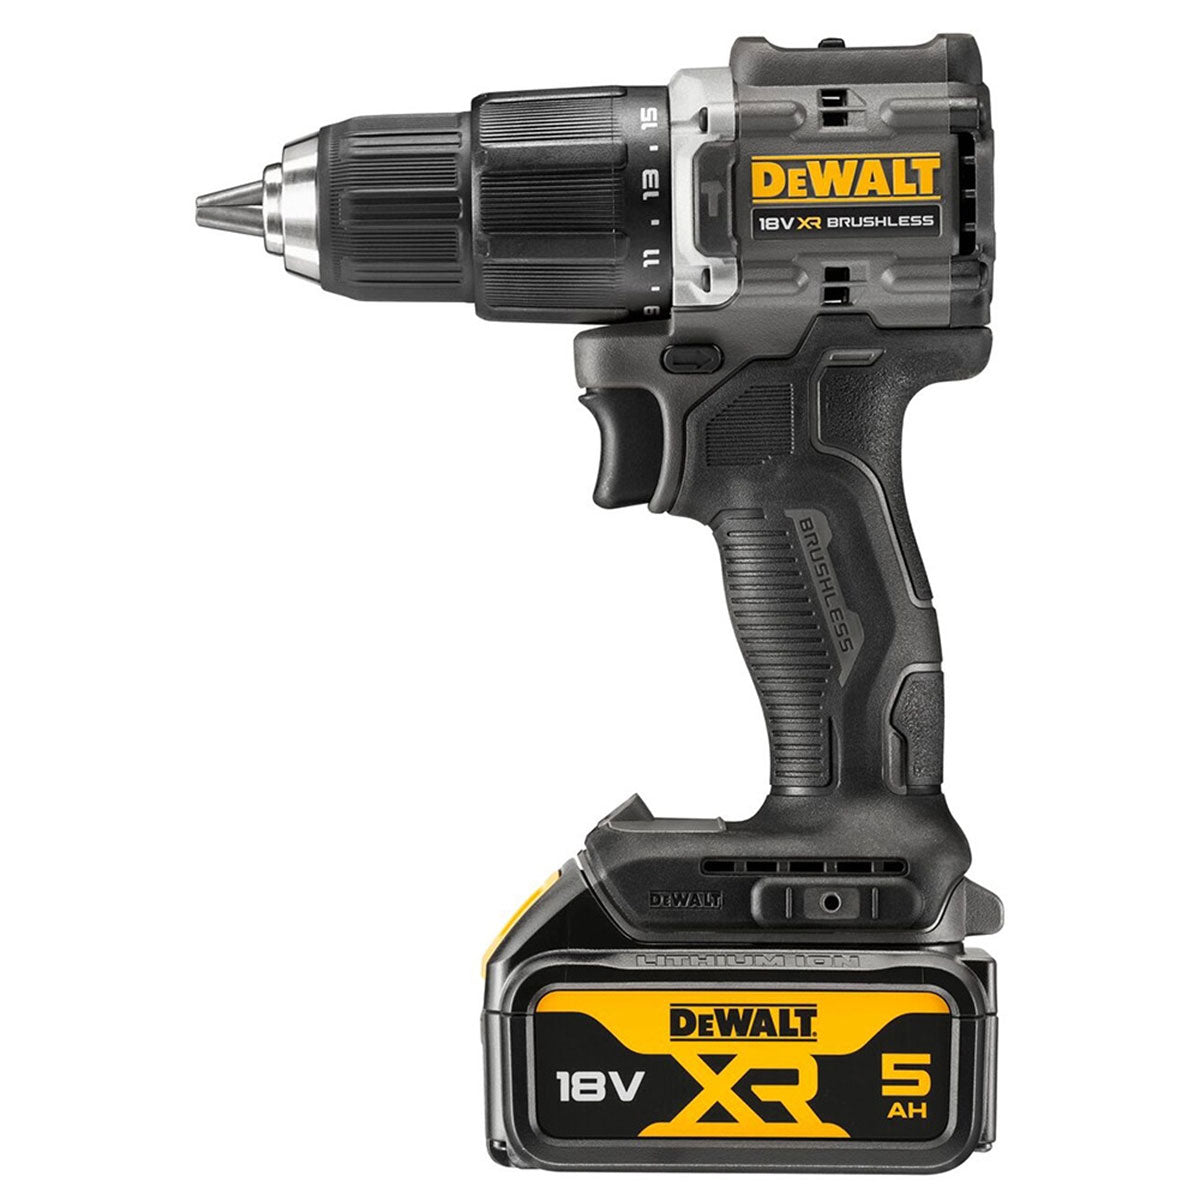 Dewalt DCD100P2T-GB 18V XR Brushless Limited Edition 100 Year Combi Drill with 2 x 5.0Ah Batteries Charger & TSTAK Case